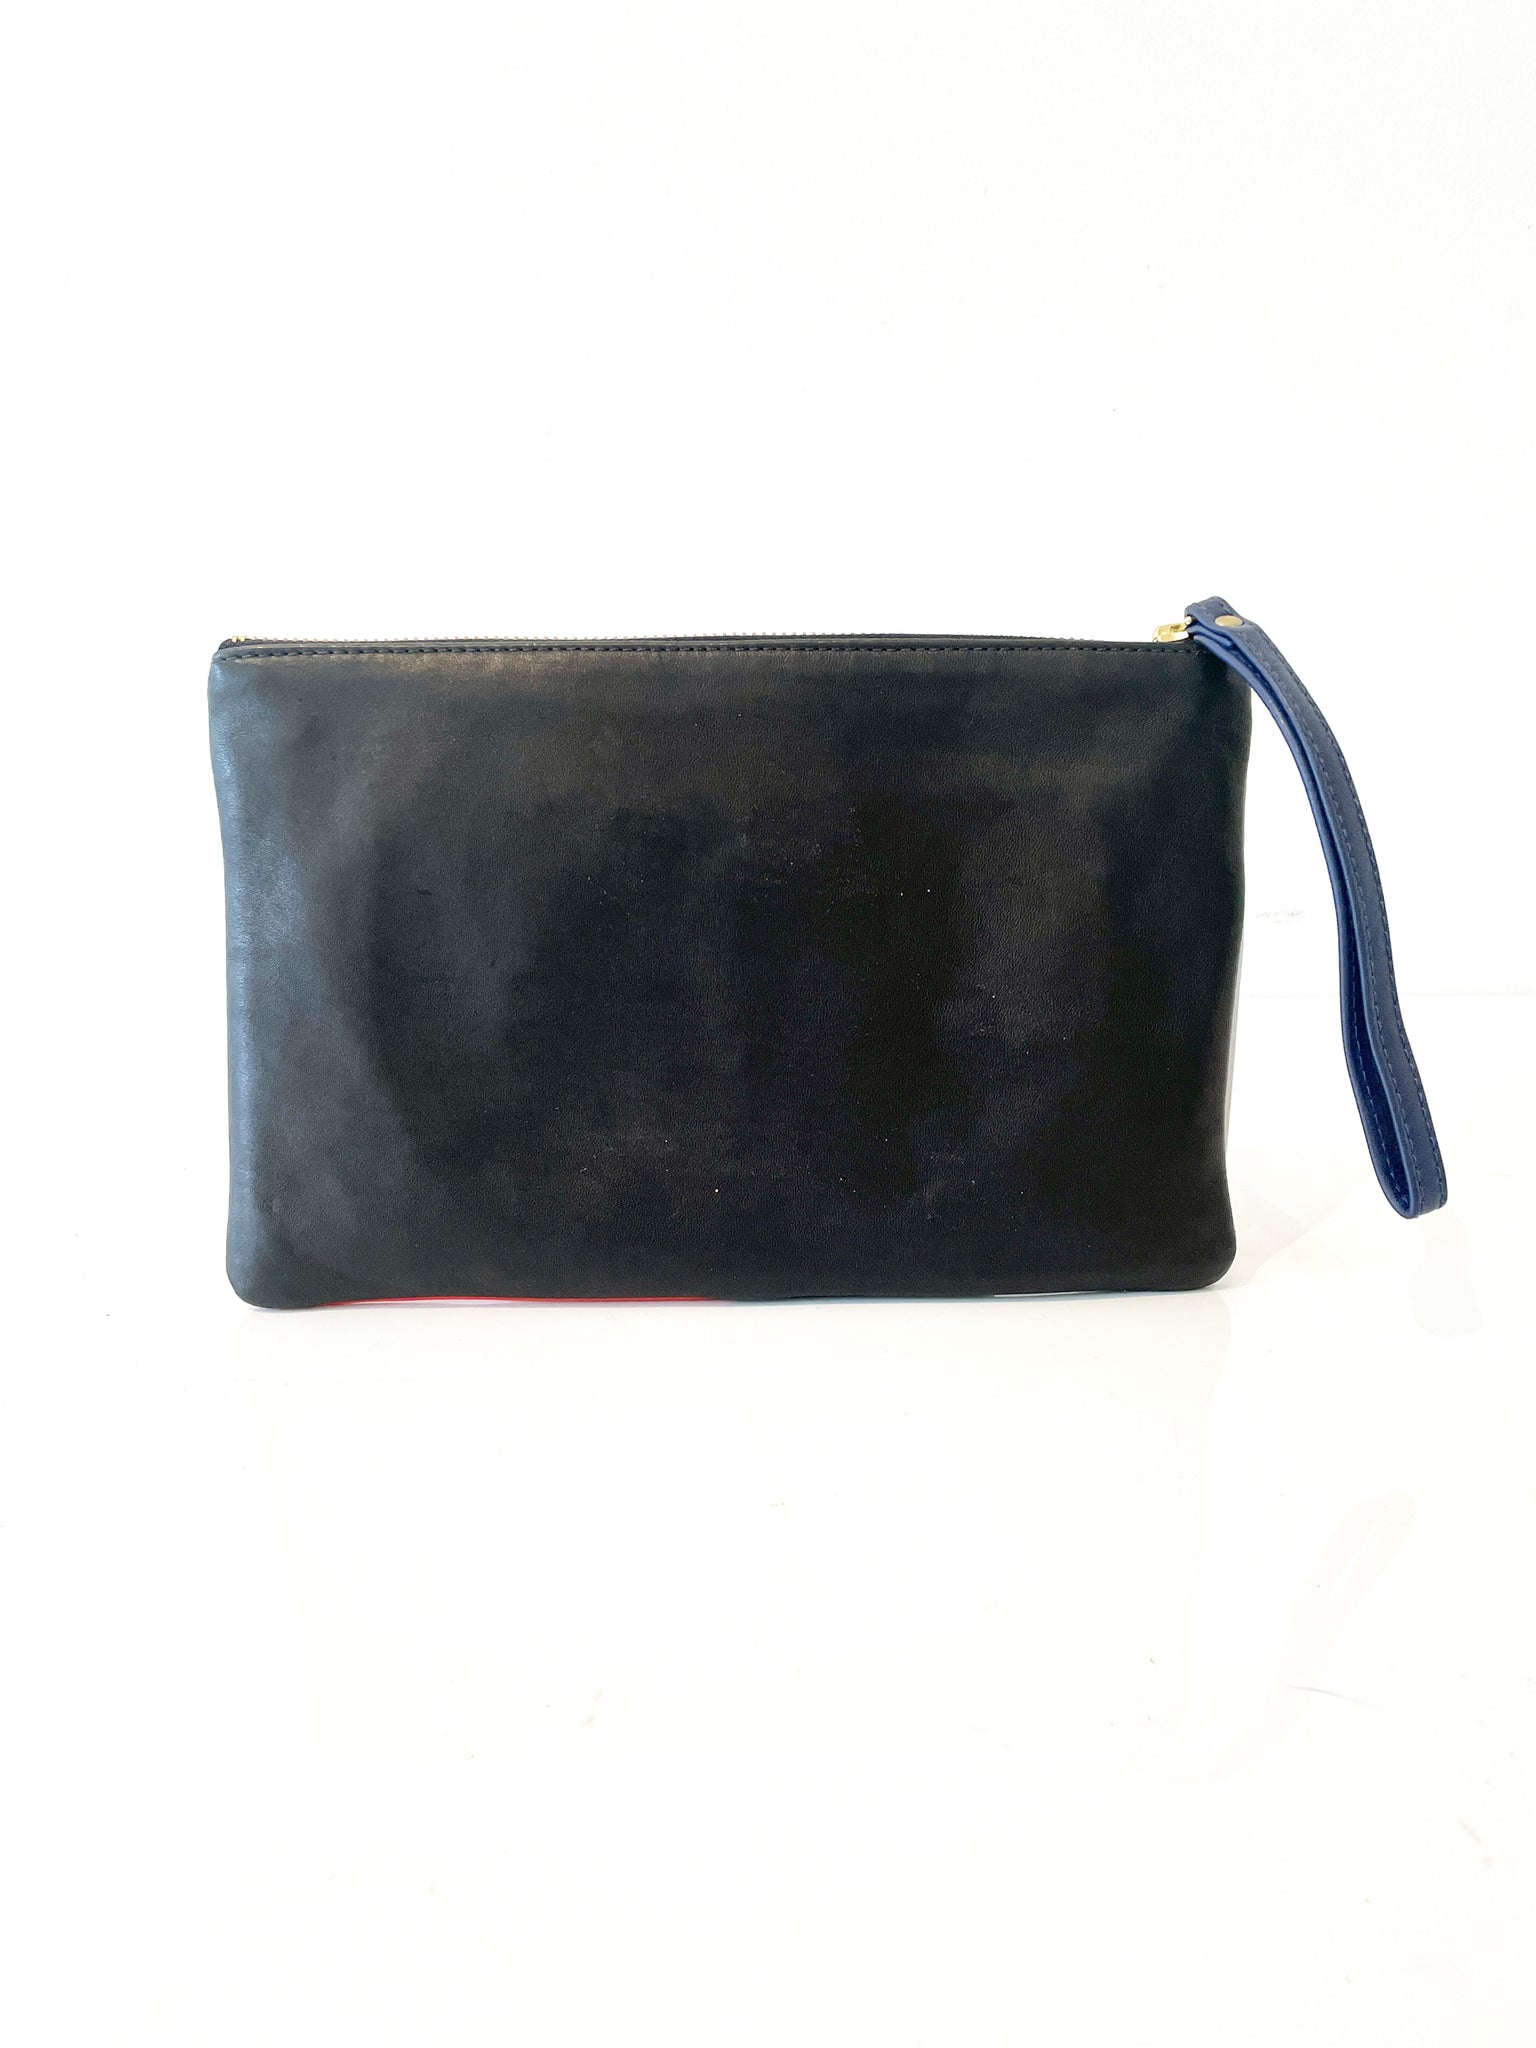 Navy and Red Leather Clutch